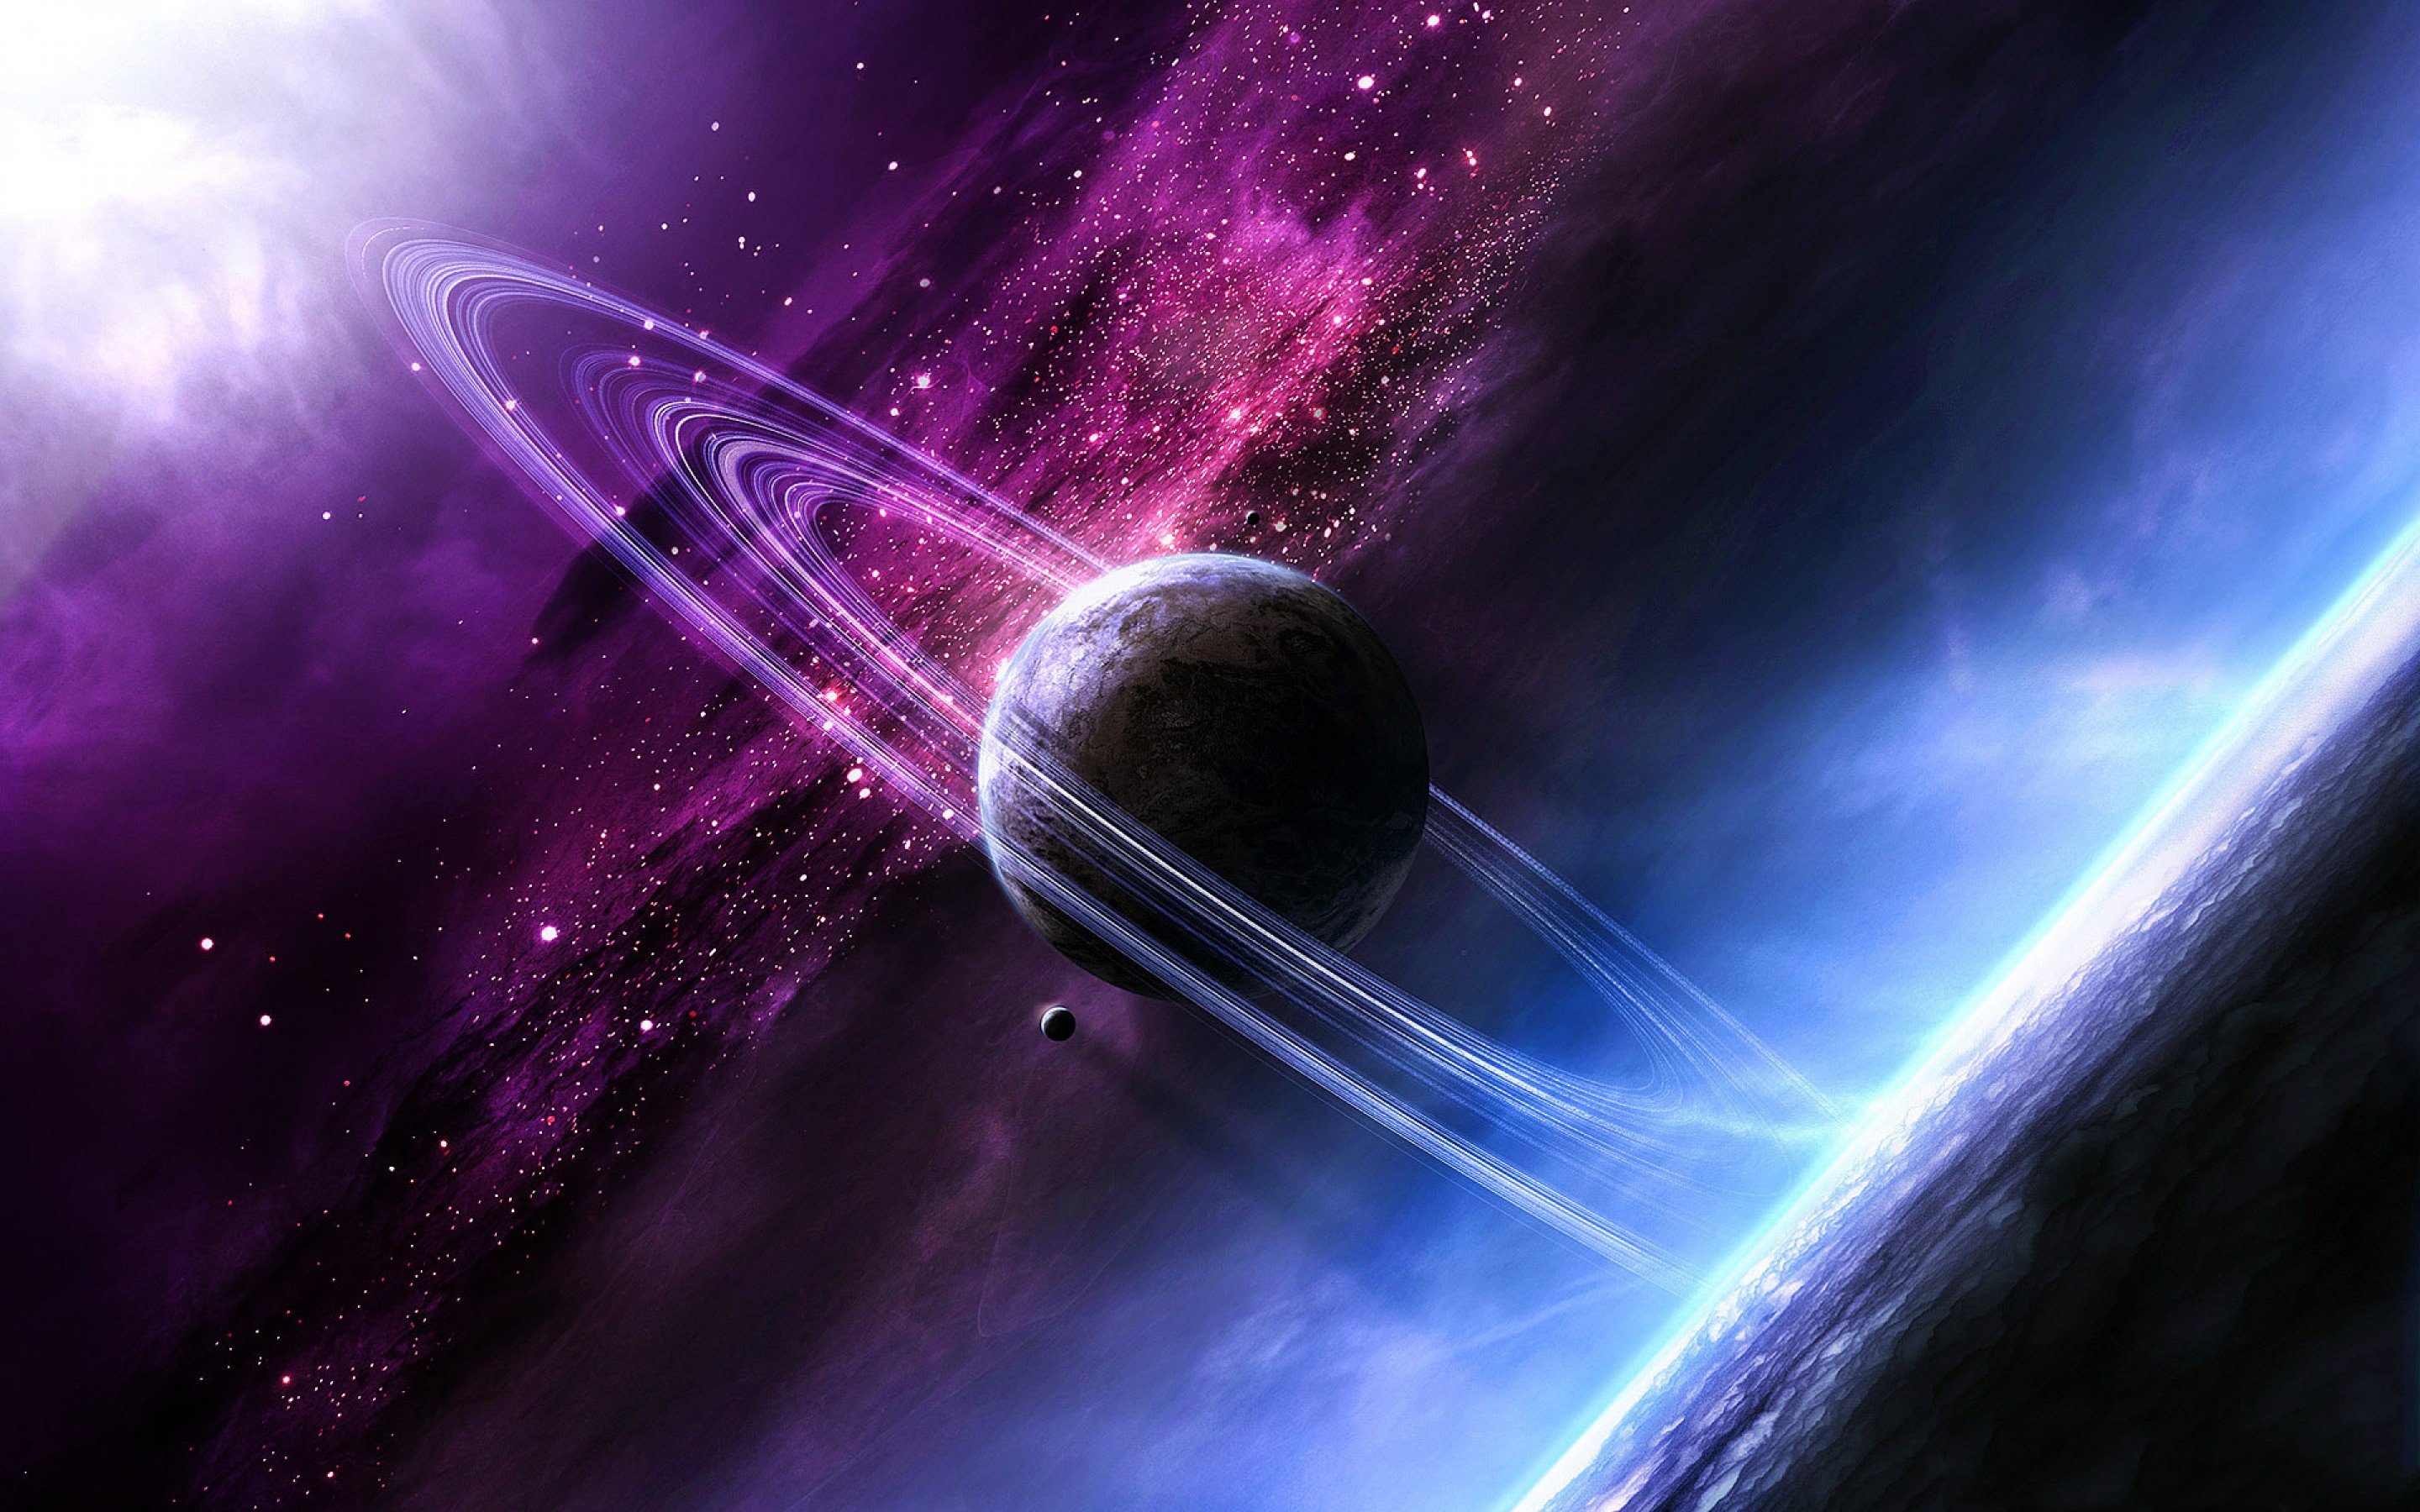 cool space wallpapers hd,outer space,purple,space,universe,atmosphere